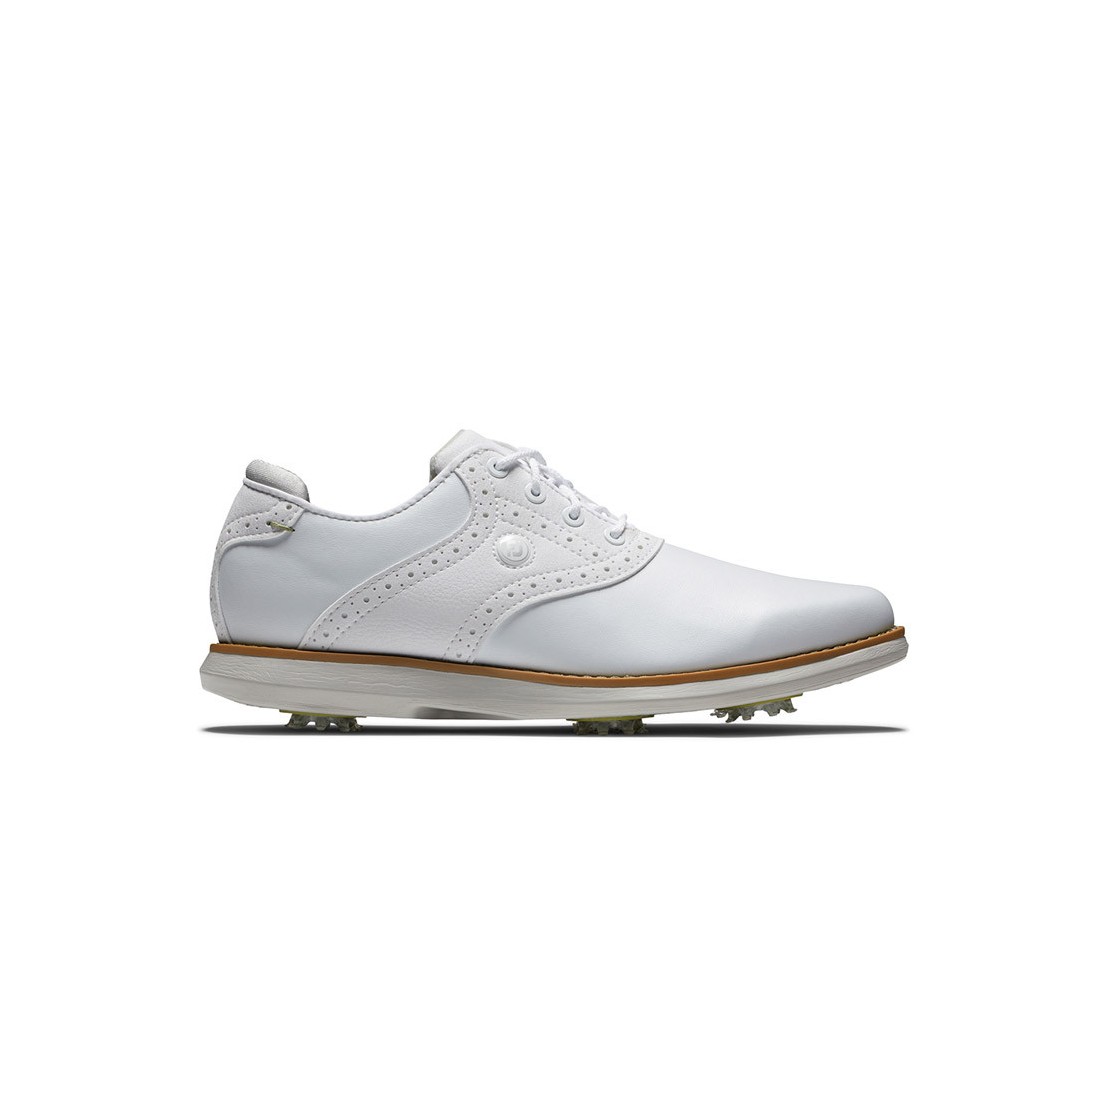 Footjoy chaussures Traditions lady blanches 1